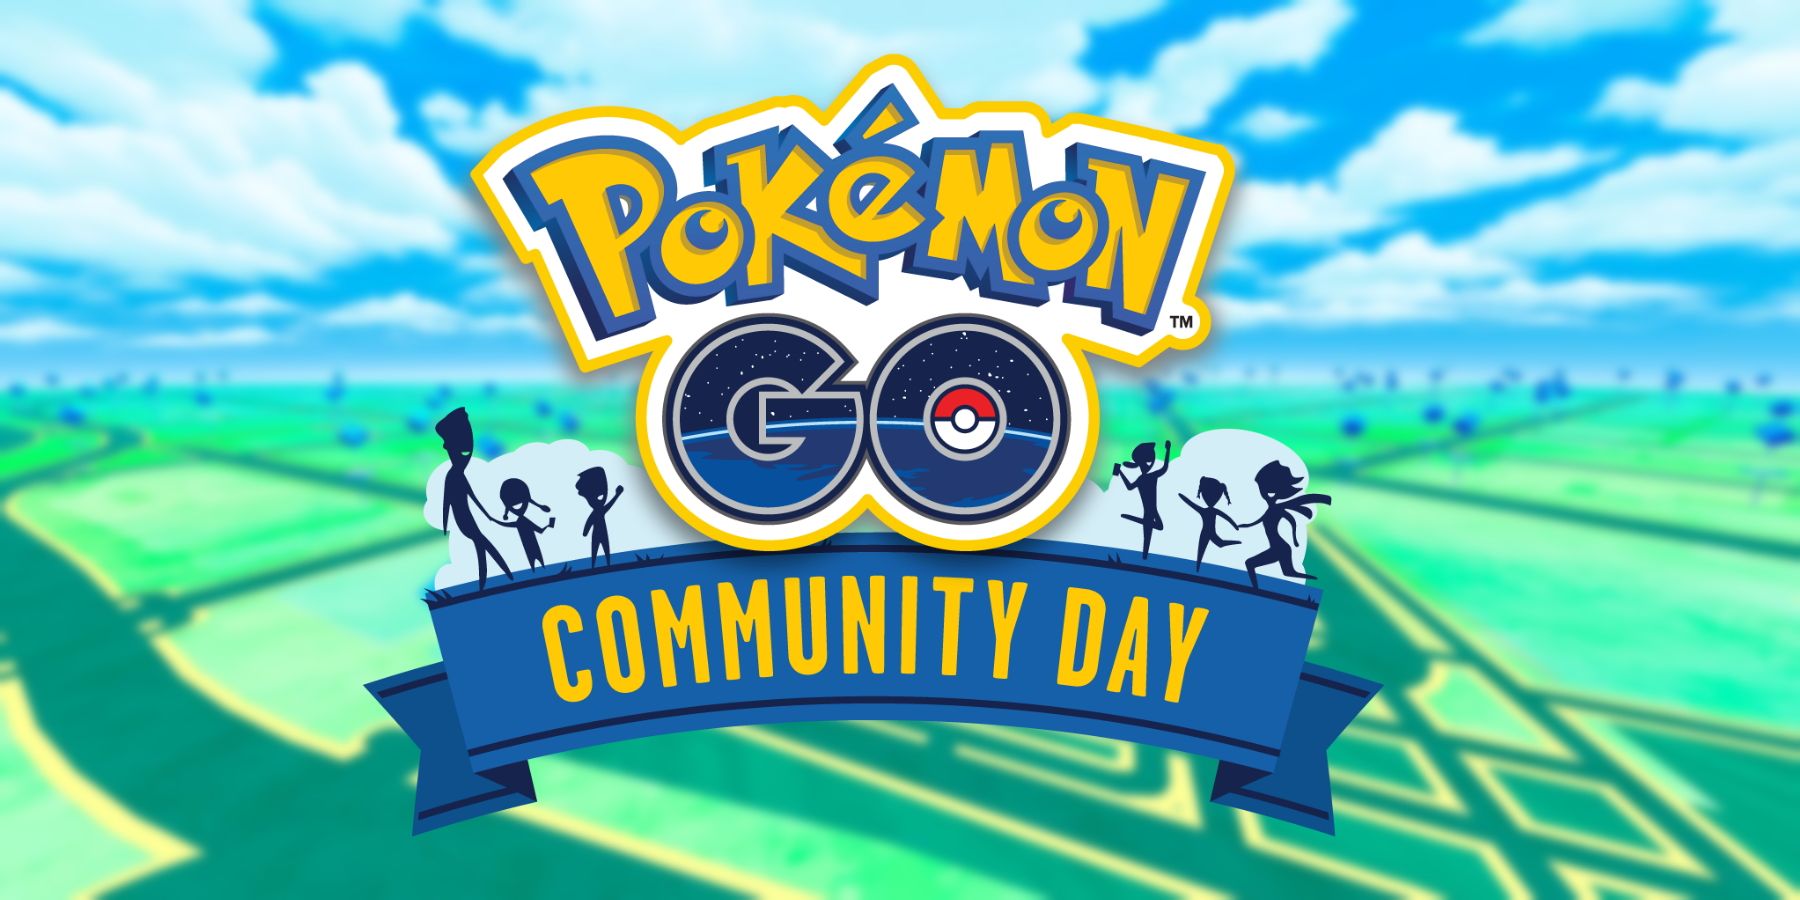 A blurred image of a Pokemon GO Map overlayed with the Pokemon GO Community Day logo.